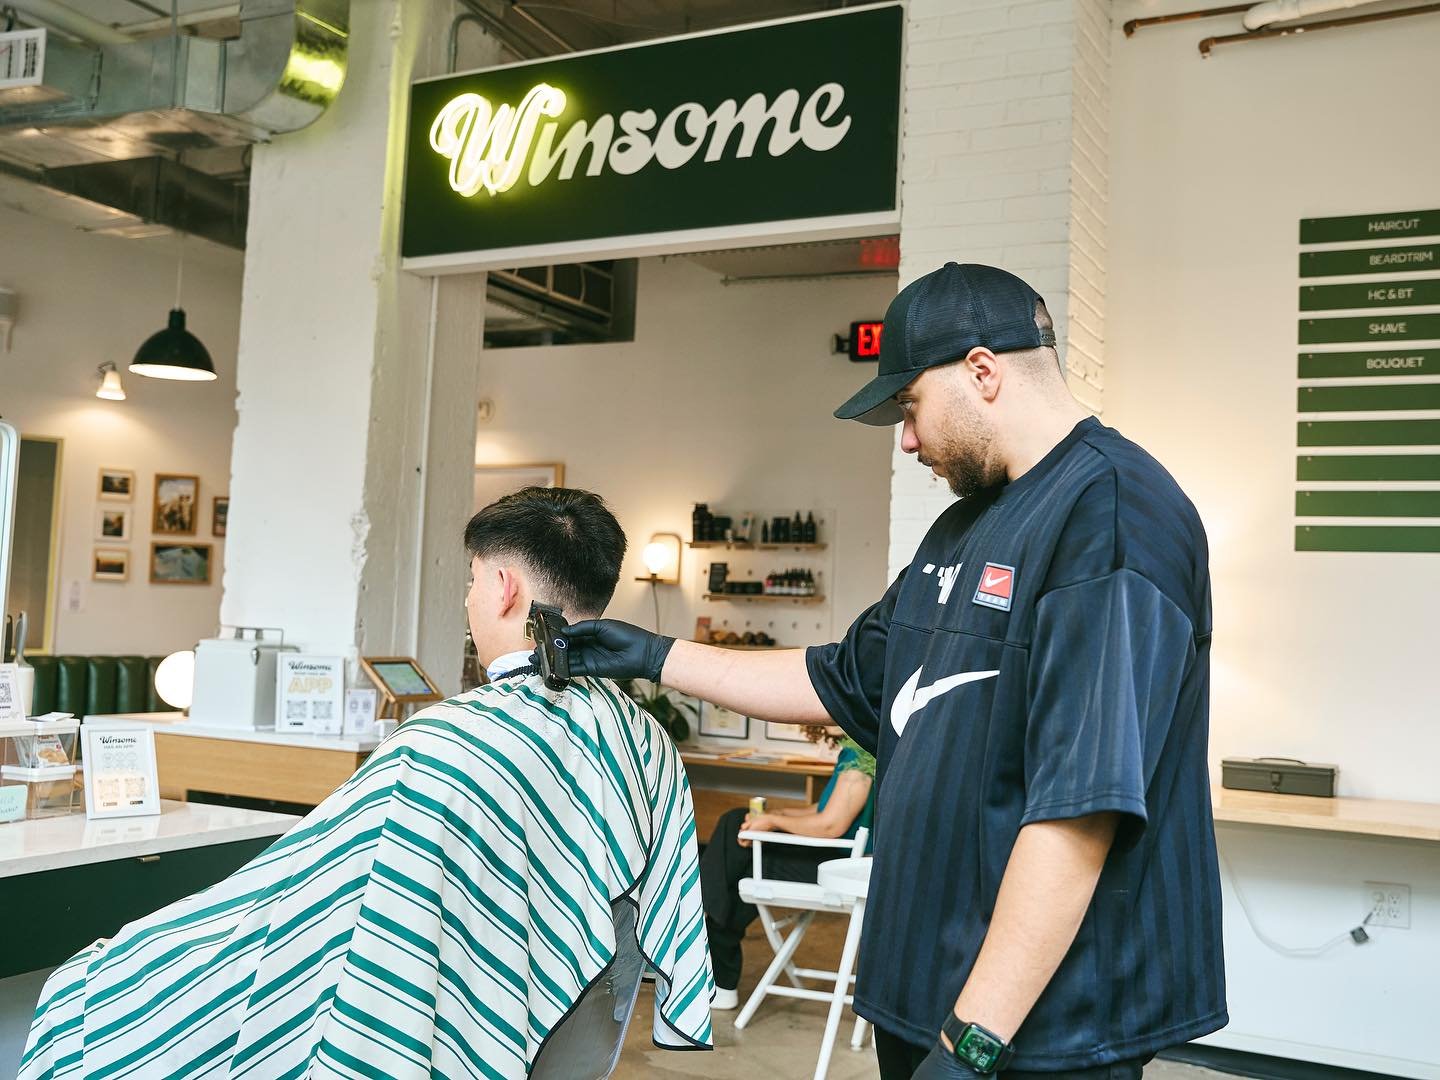 With ease
💈: @thebarberlb_ 
📷: @capncoffee